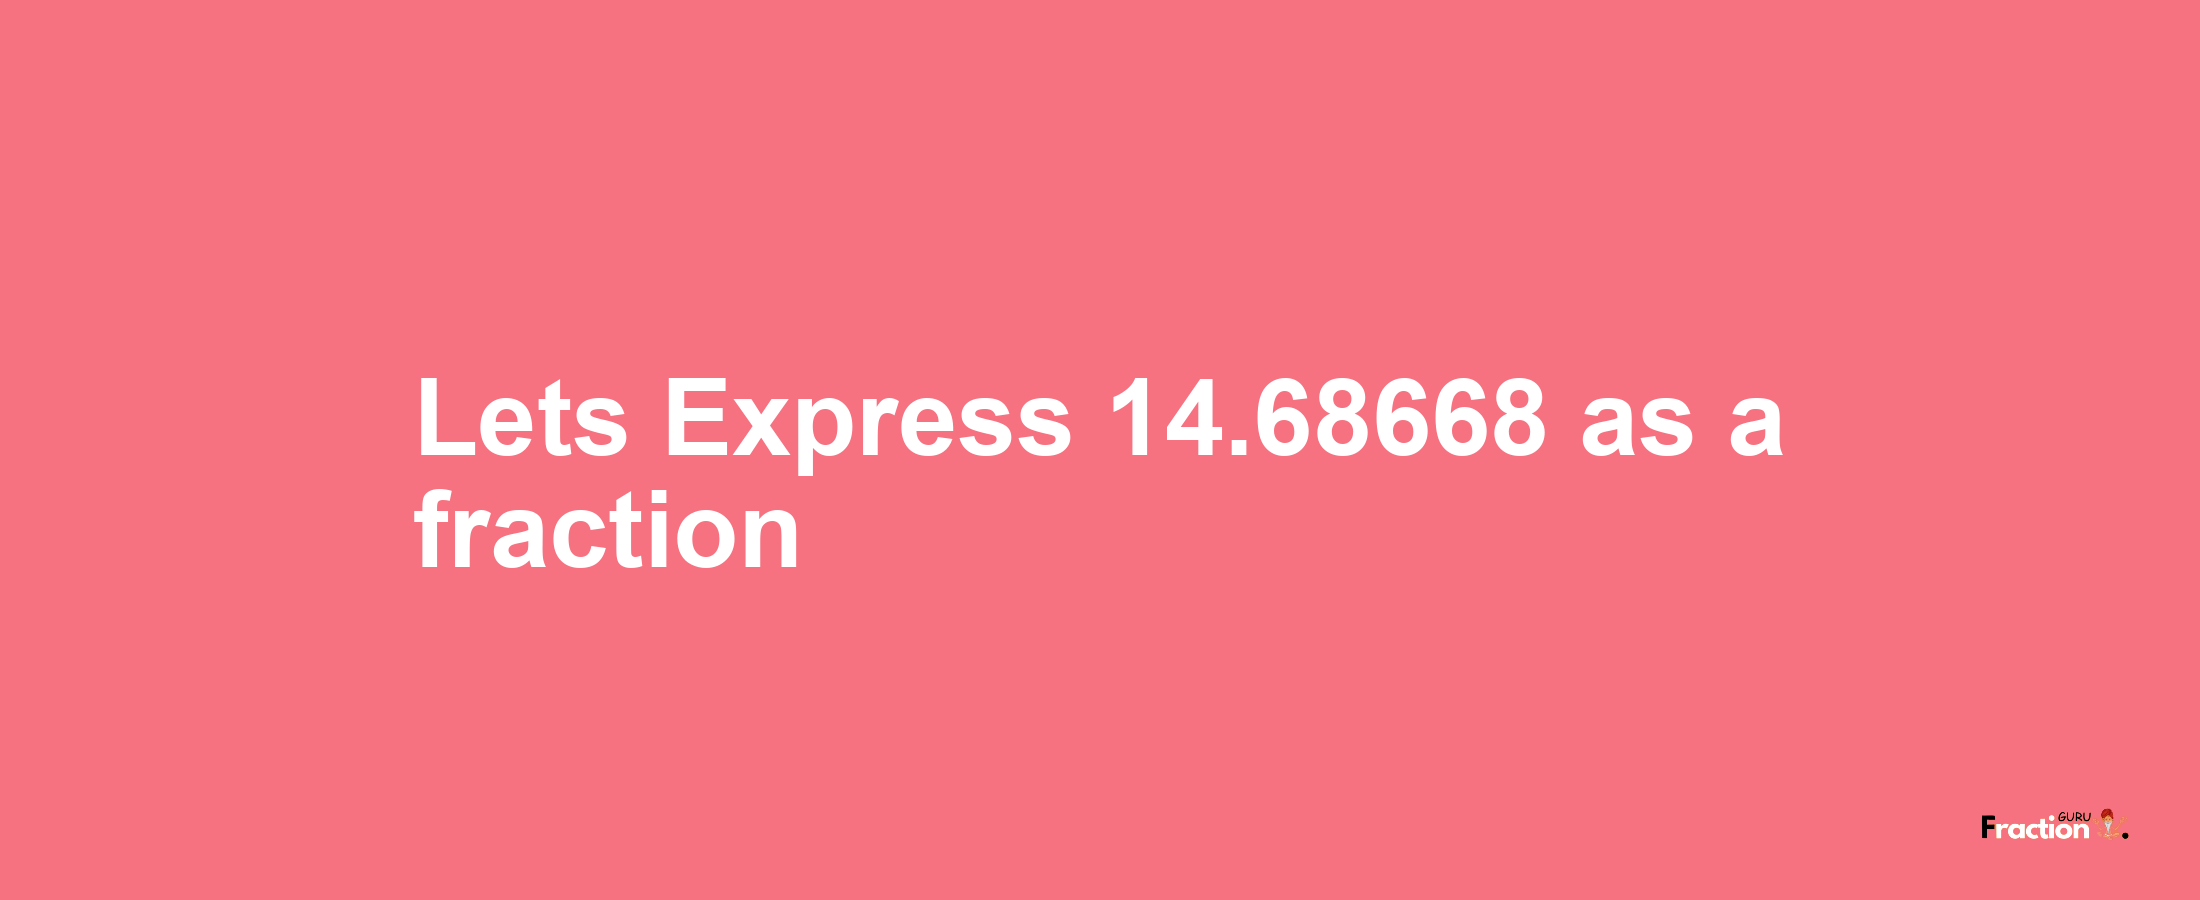 Lets Express 14.68668 as afraction